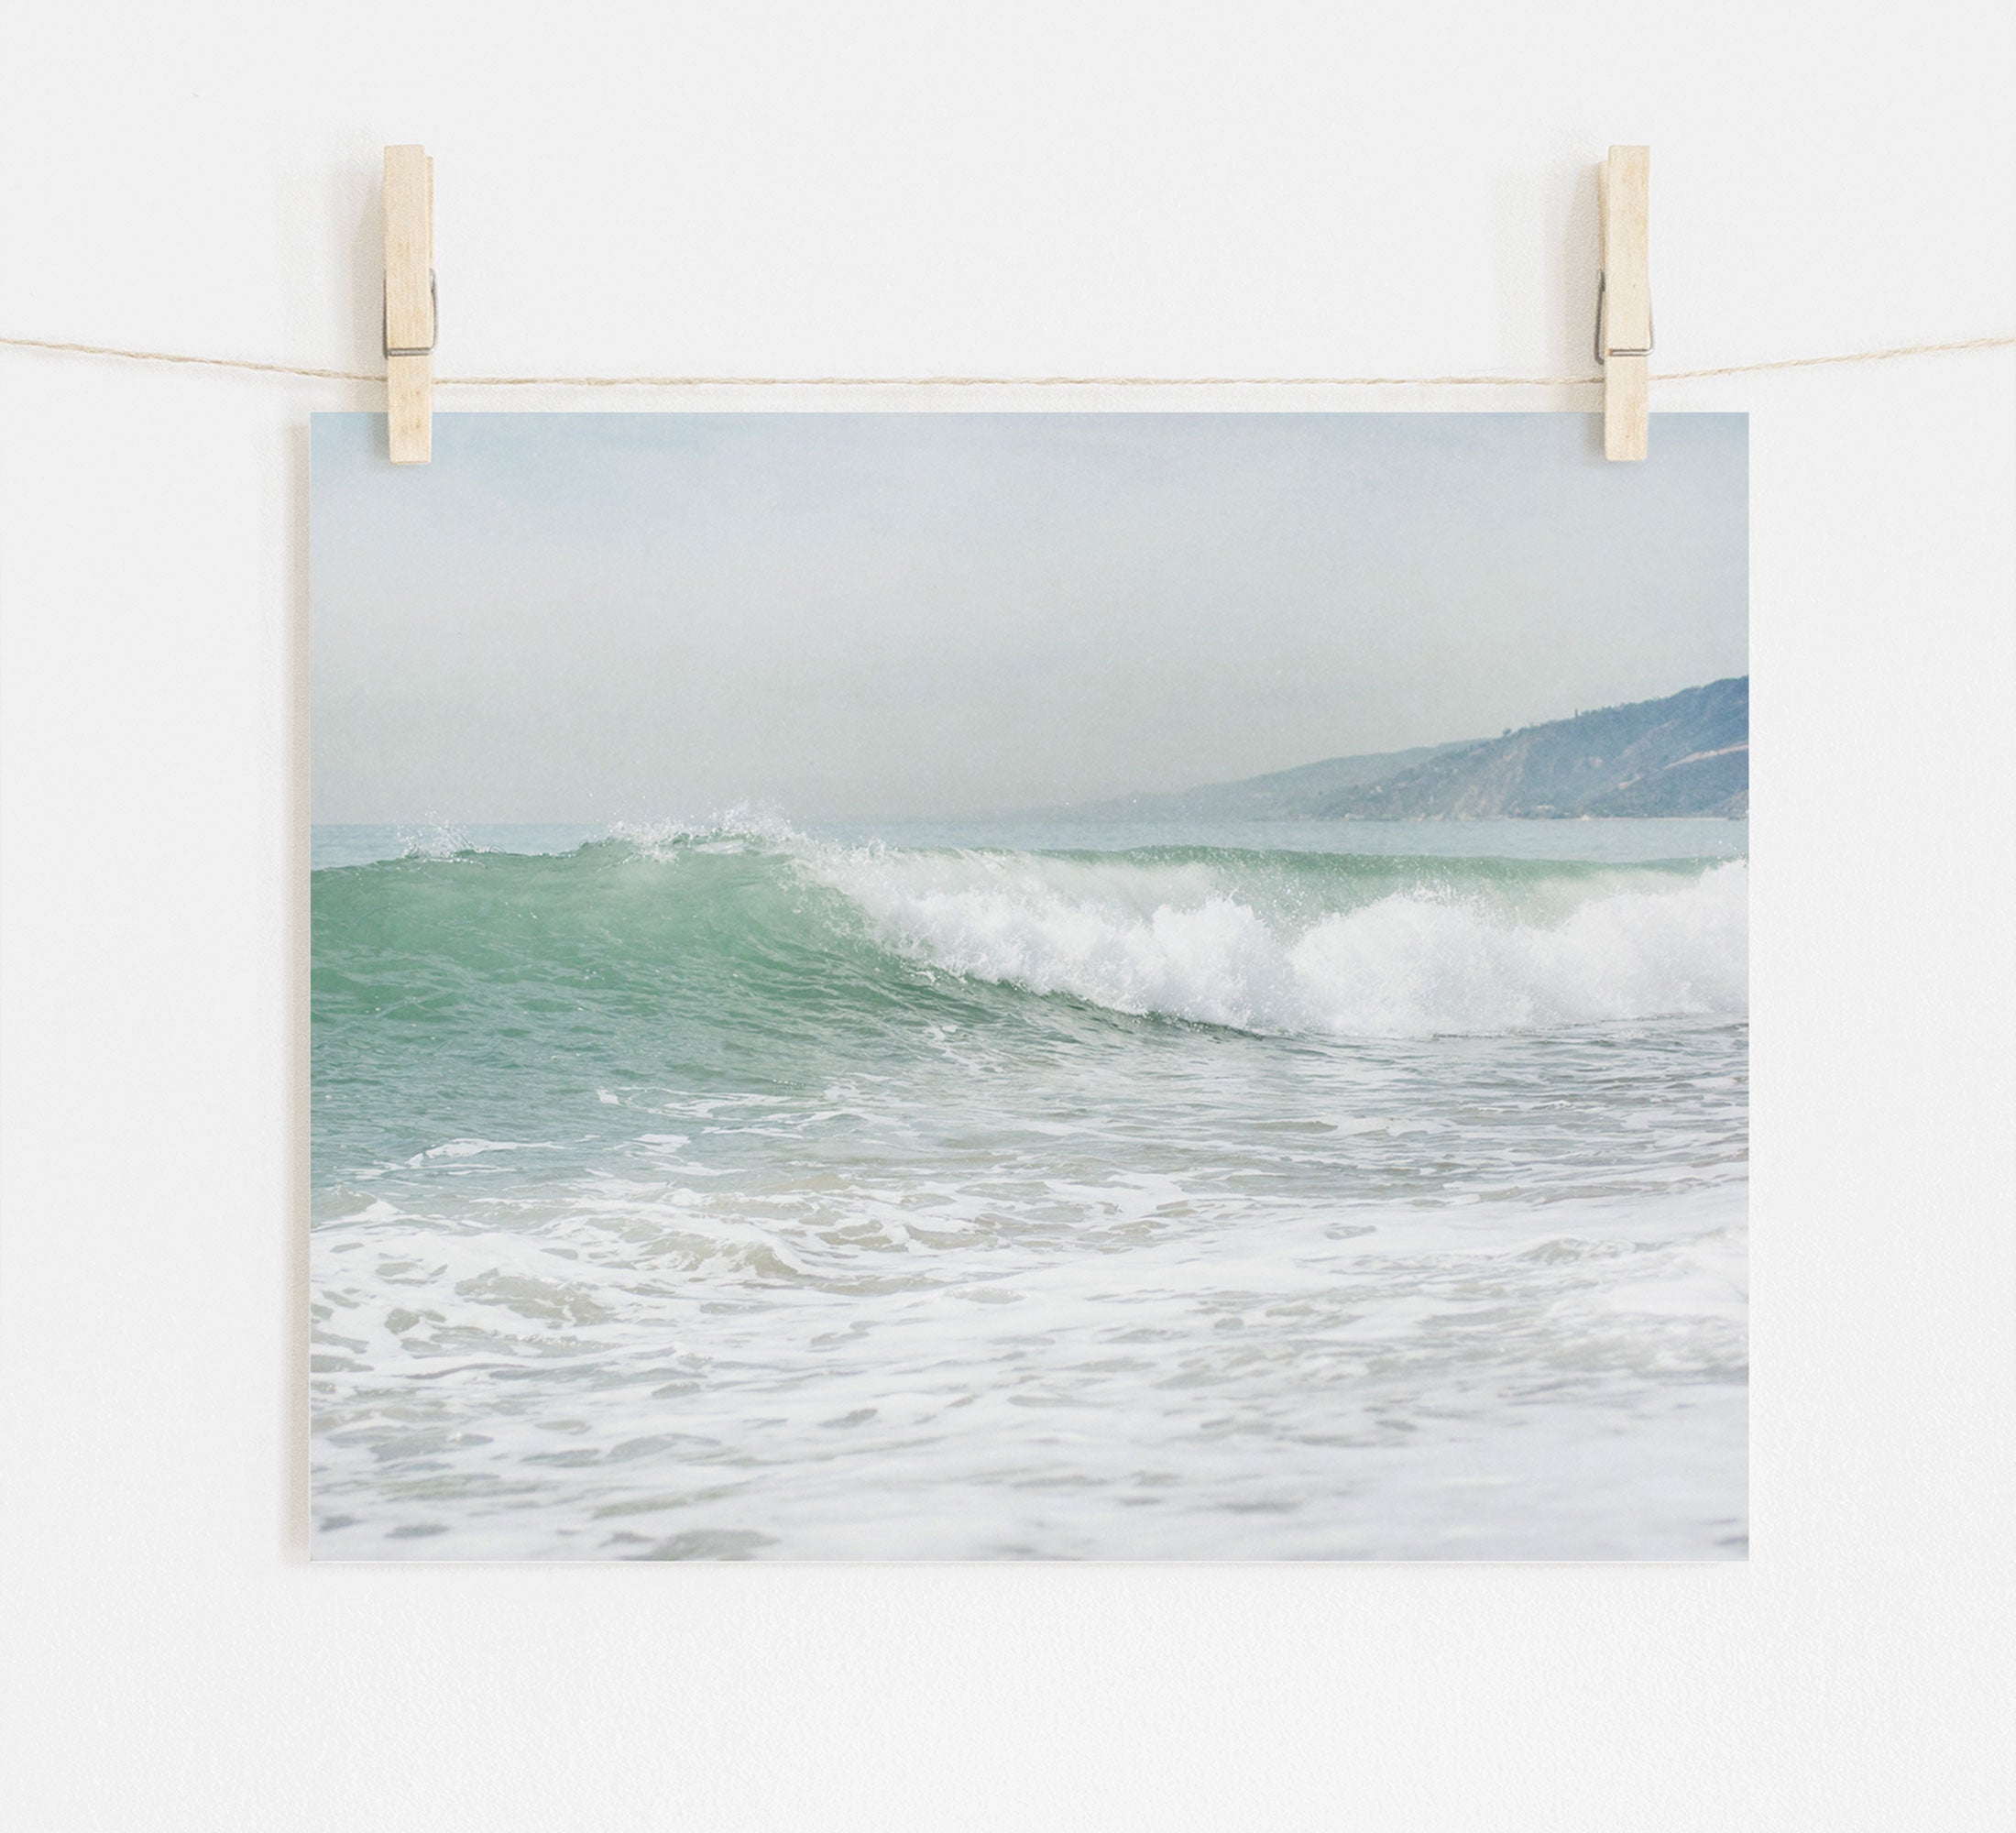 A Offley Green photo print of a breaking wave titled &#39;Breaking Surf&#39; hung on a white wall with wooden clothespins on a string, depicting a Southern California beach scene that captures gentle sea waves with a hazy coastline in the background.